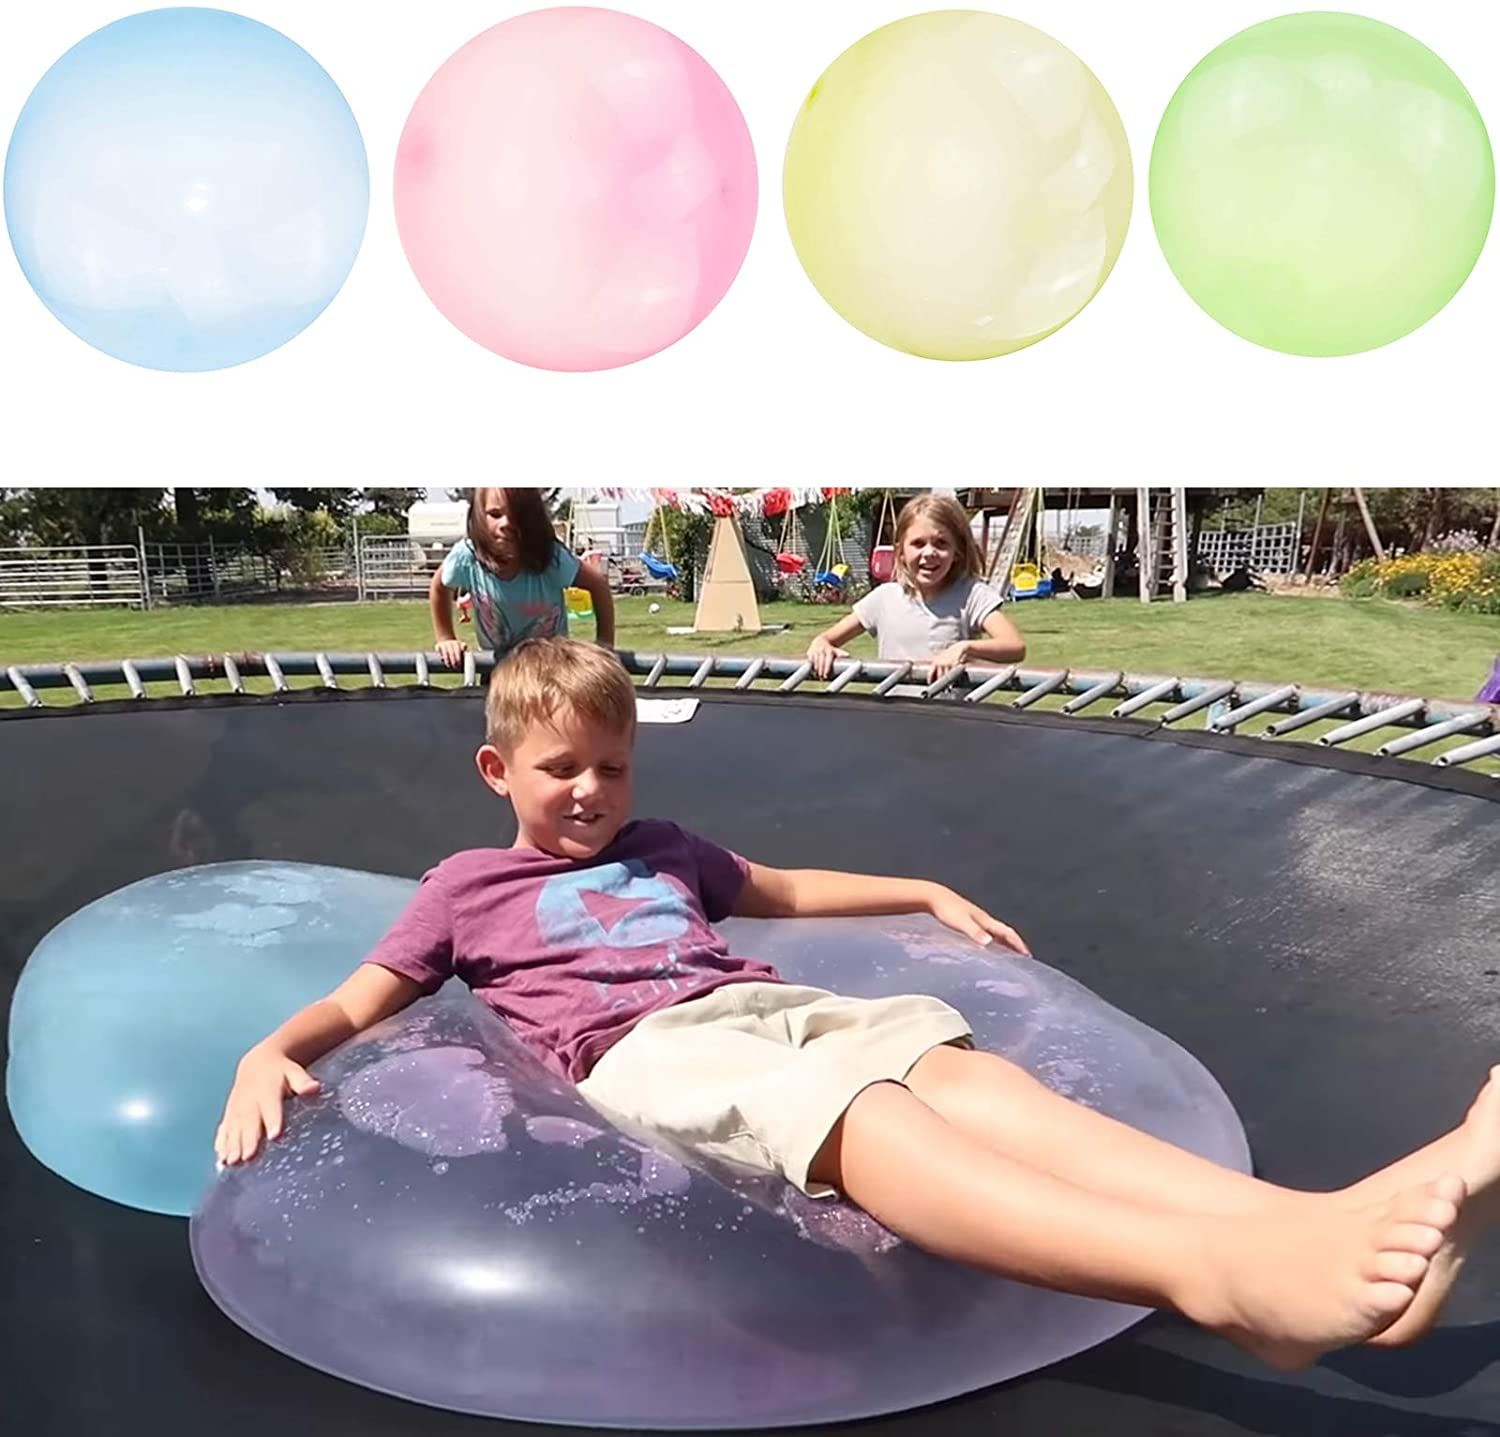 Large Amazing Water Bubble Ball Inflatable Balloons Outdoor Beach Balls Toy 70cm 